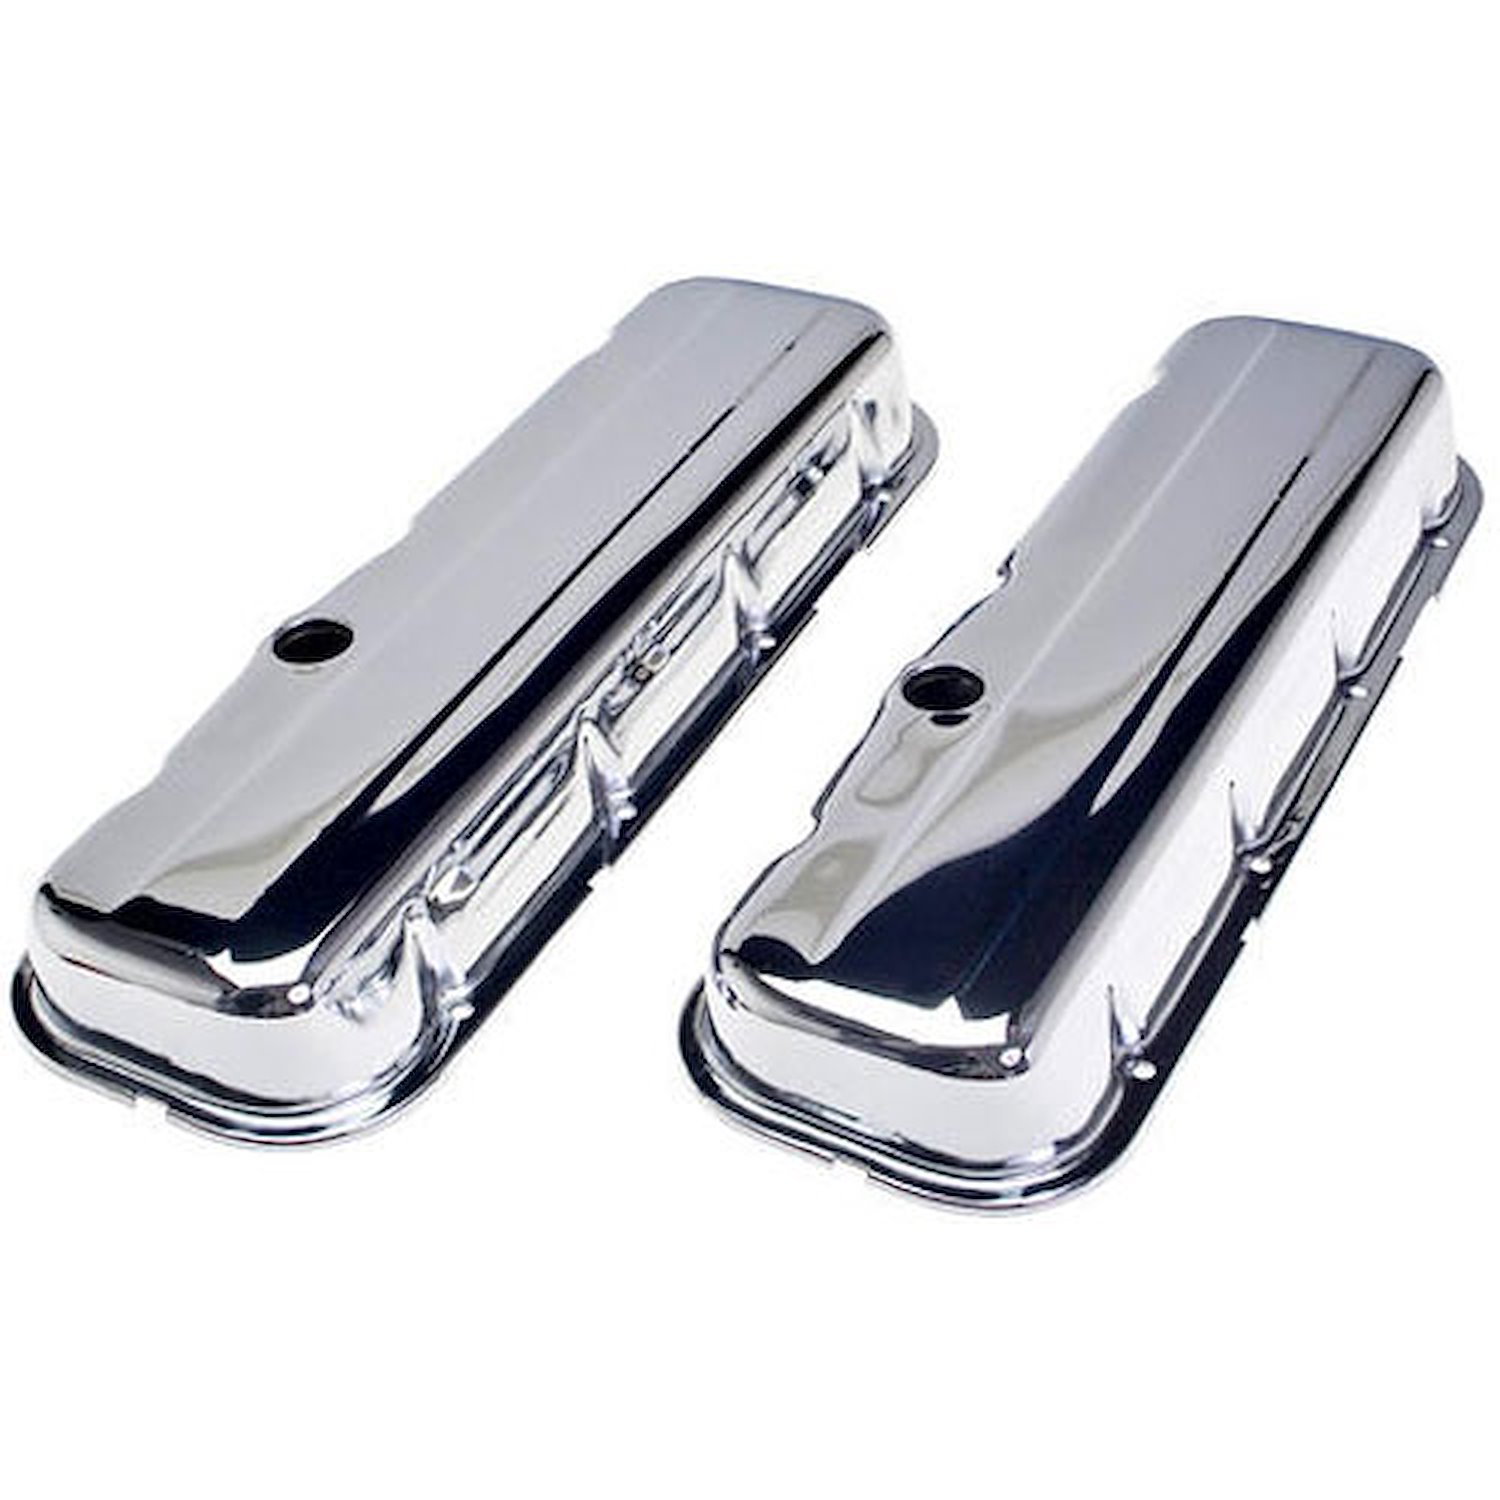 Chrome Plated Steel Valve Covers 1965-2000 Big Block Chevy 396-502 V8